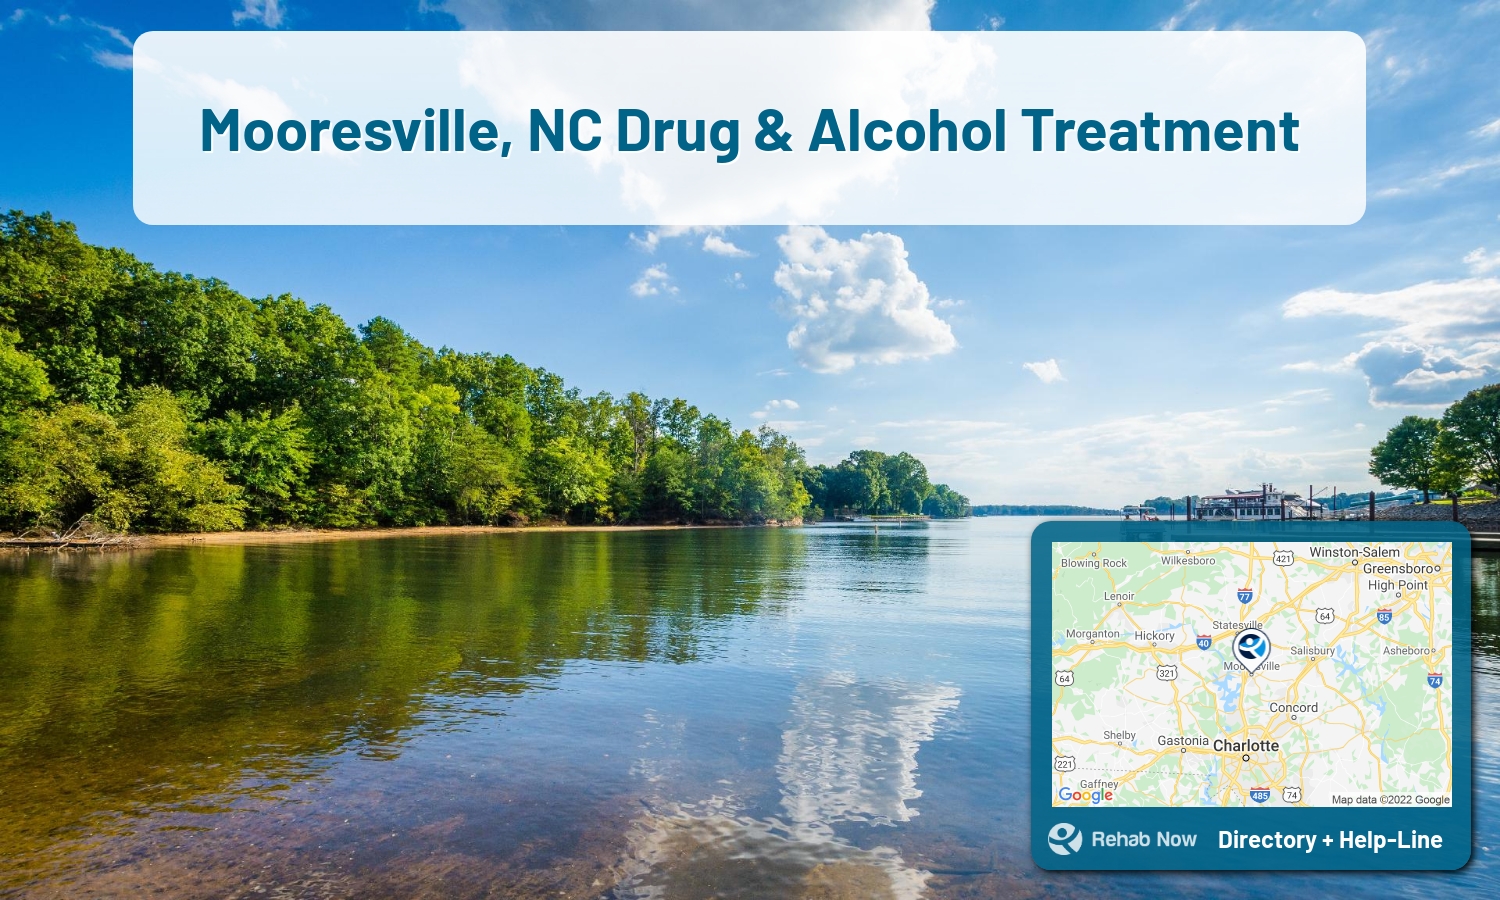 Mooresville, NC Treatment Centers. Find drug rehab in Mooresville, North Carolina, or detox and treatment programs. Get the right help now!